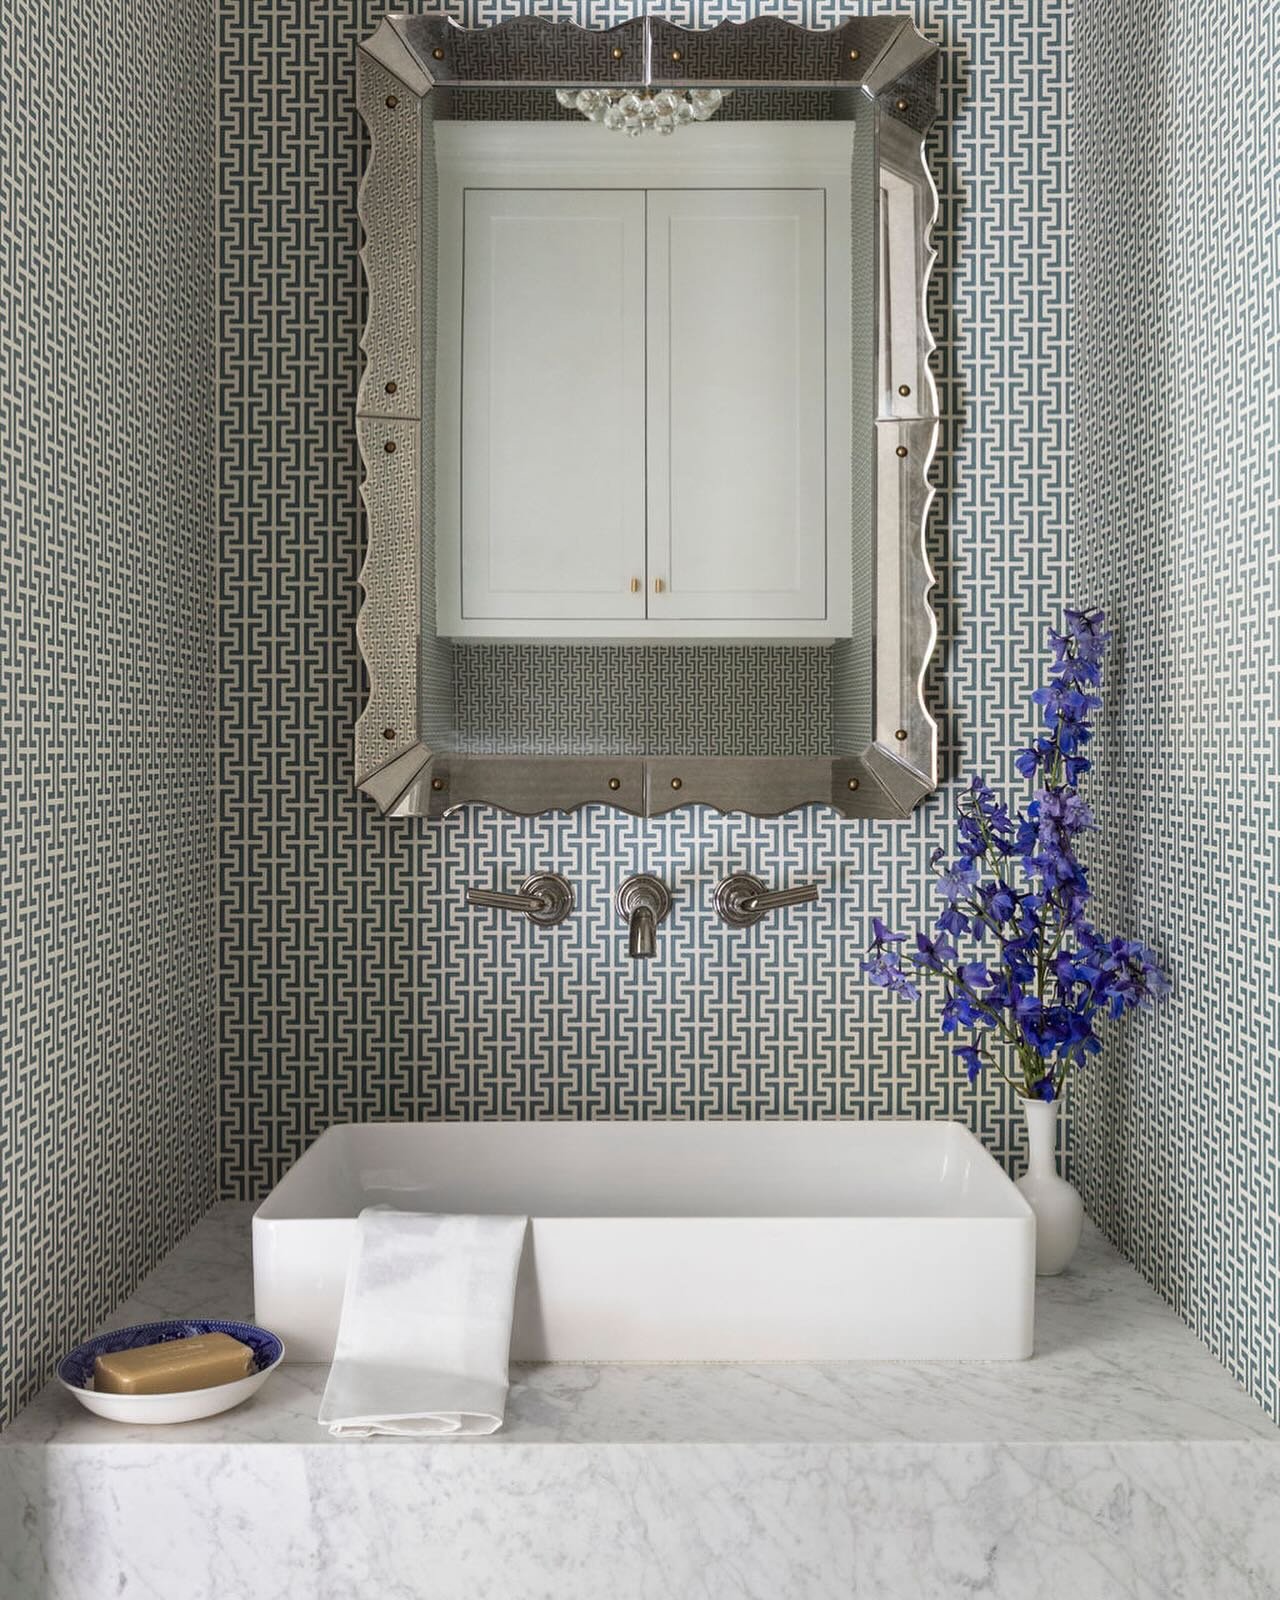 Small but Mighty: Enveloping small spaces in wallpaper can often trick the eye into making spaces appear larger than they actually are. You have to embrace design challenges in order to overcome them! 💙 Photography by @aimeemazzenga // Styling by @c